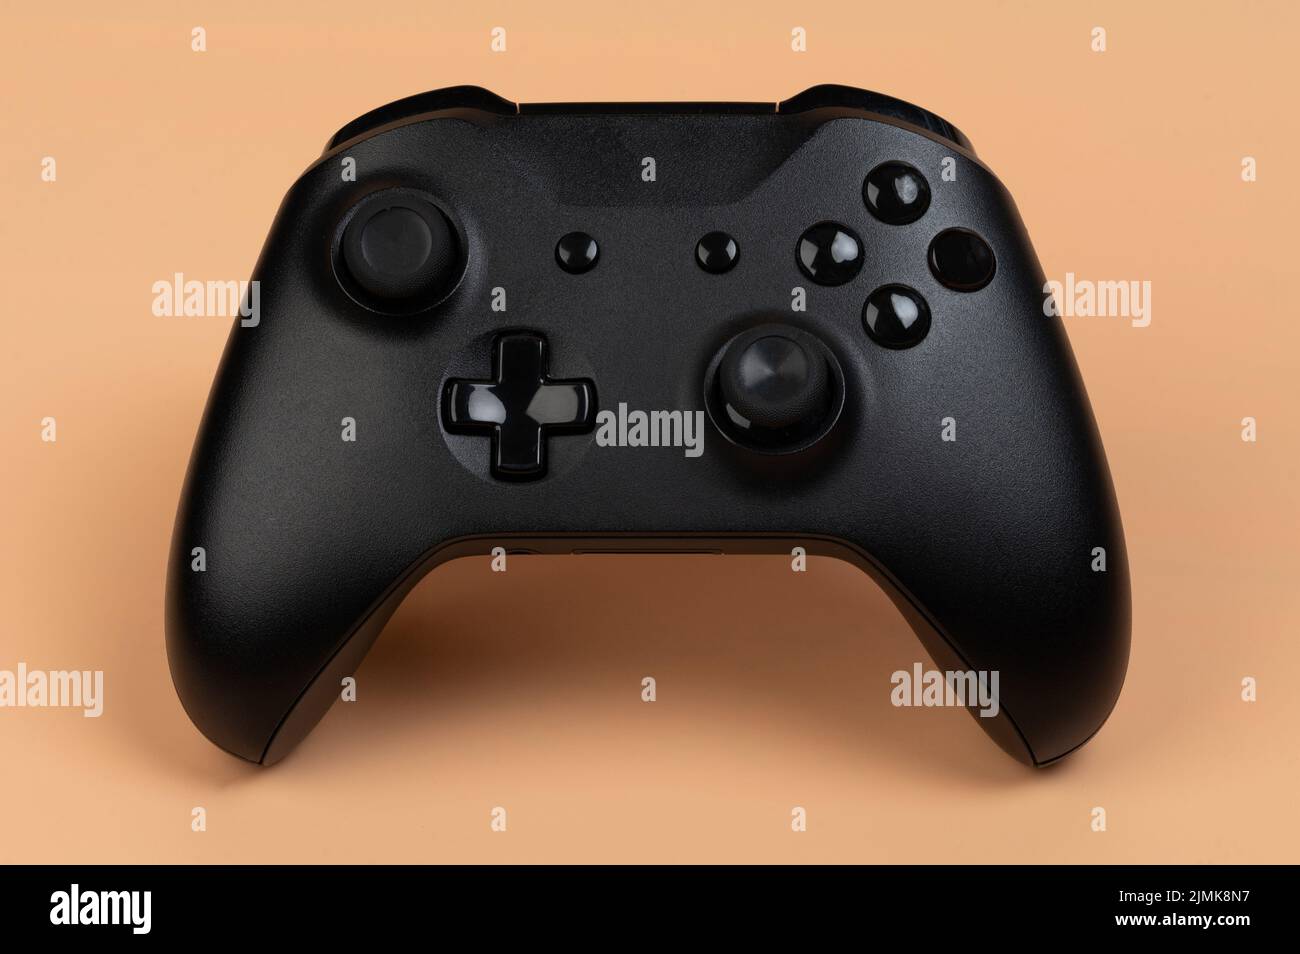 Black game controller front view isolated on brown background Stock Photo